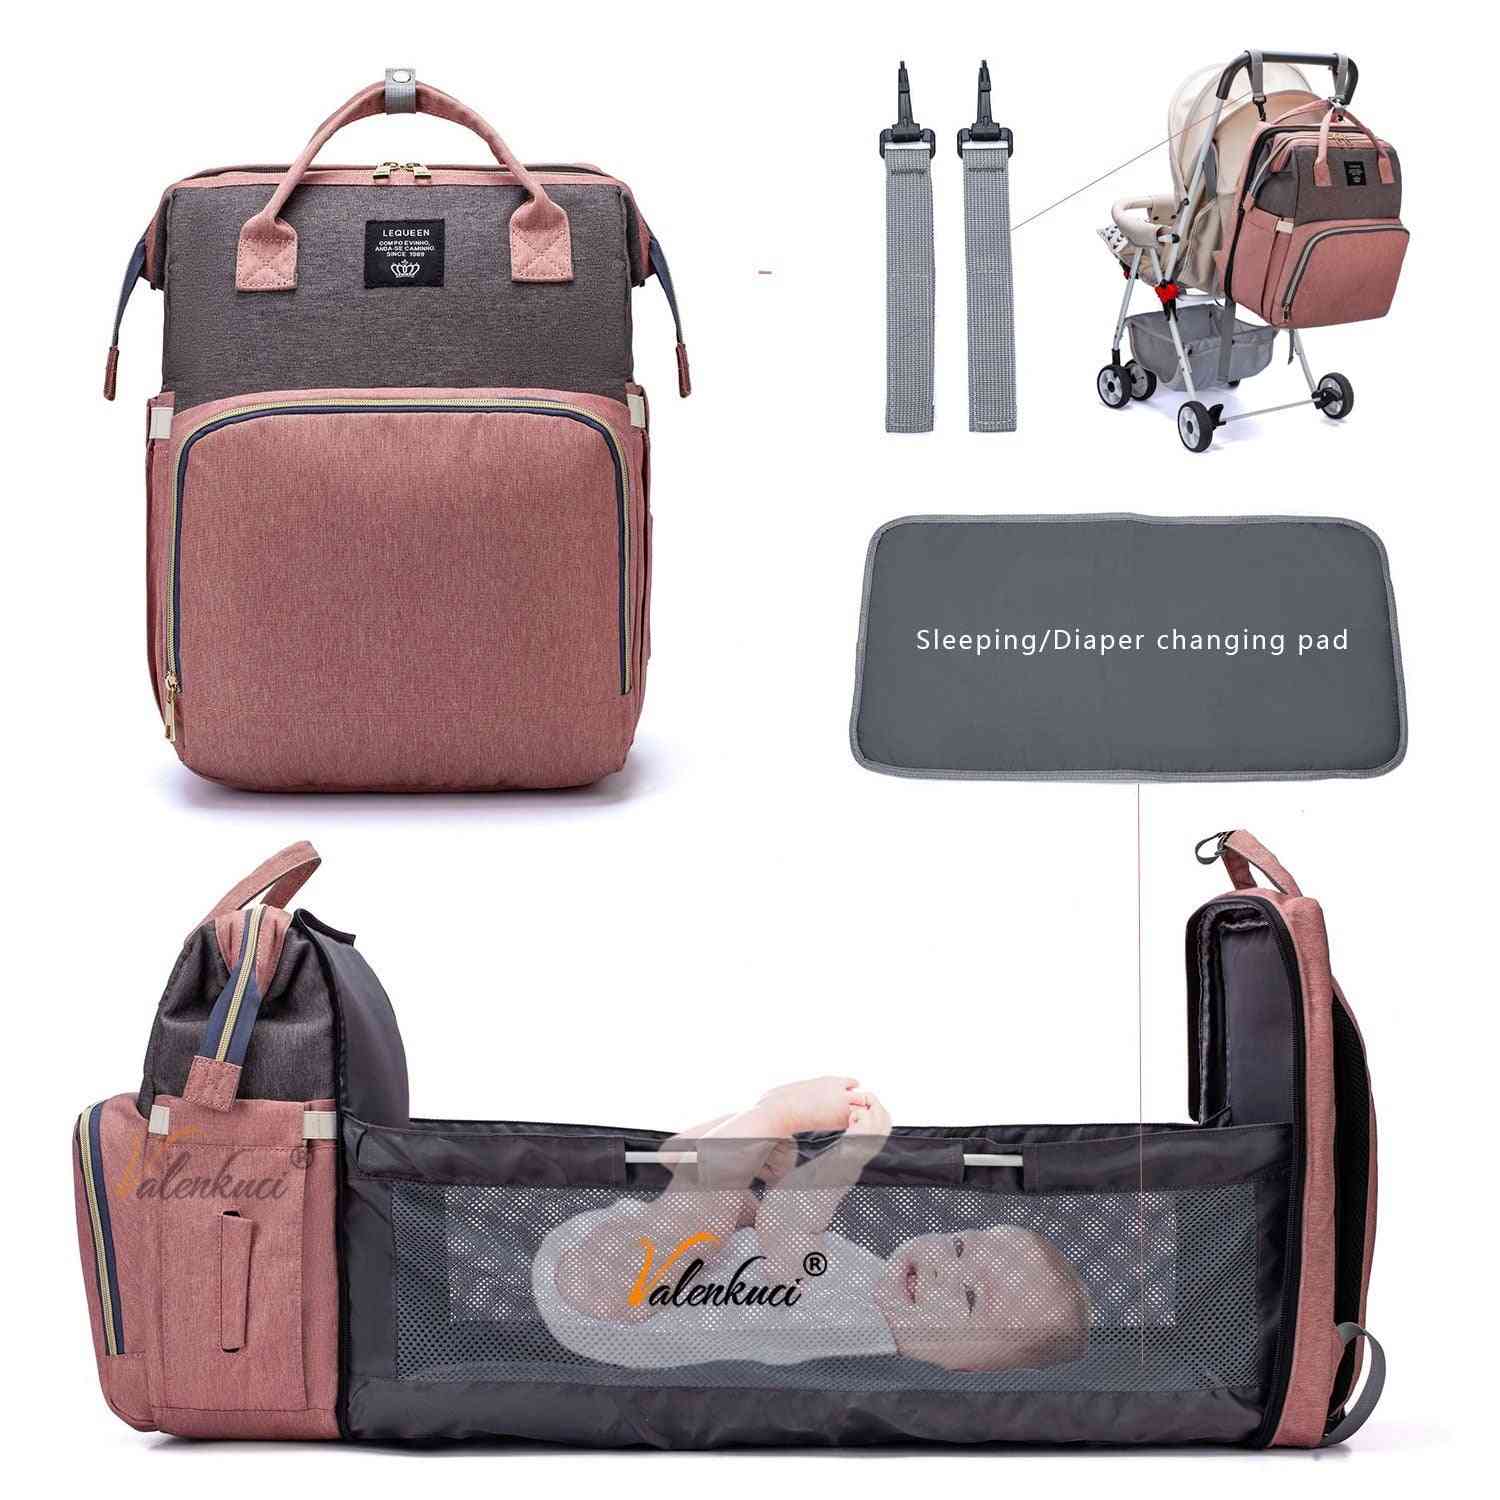 Lequeen Diaper Bag For Baby Care Kits